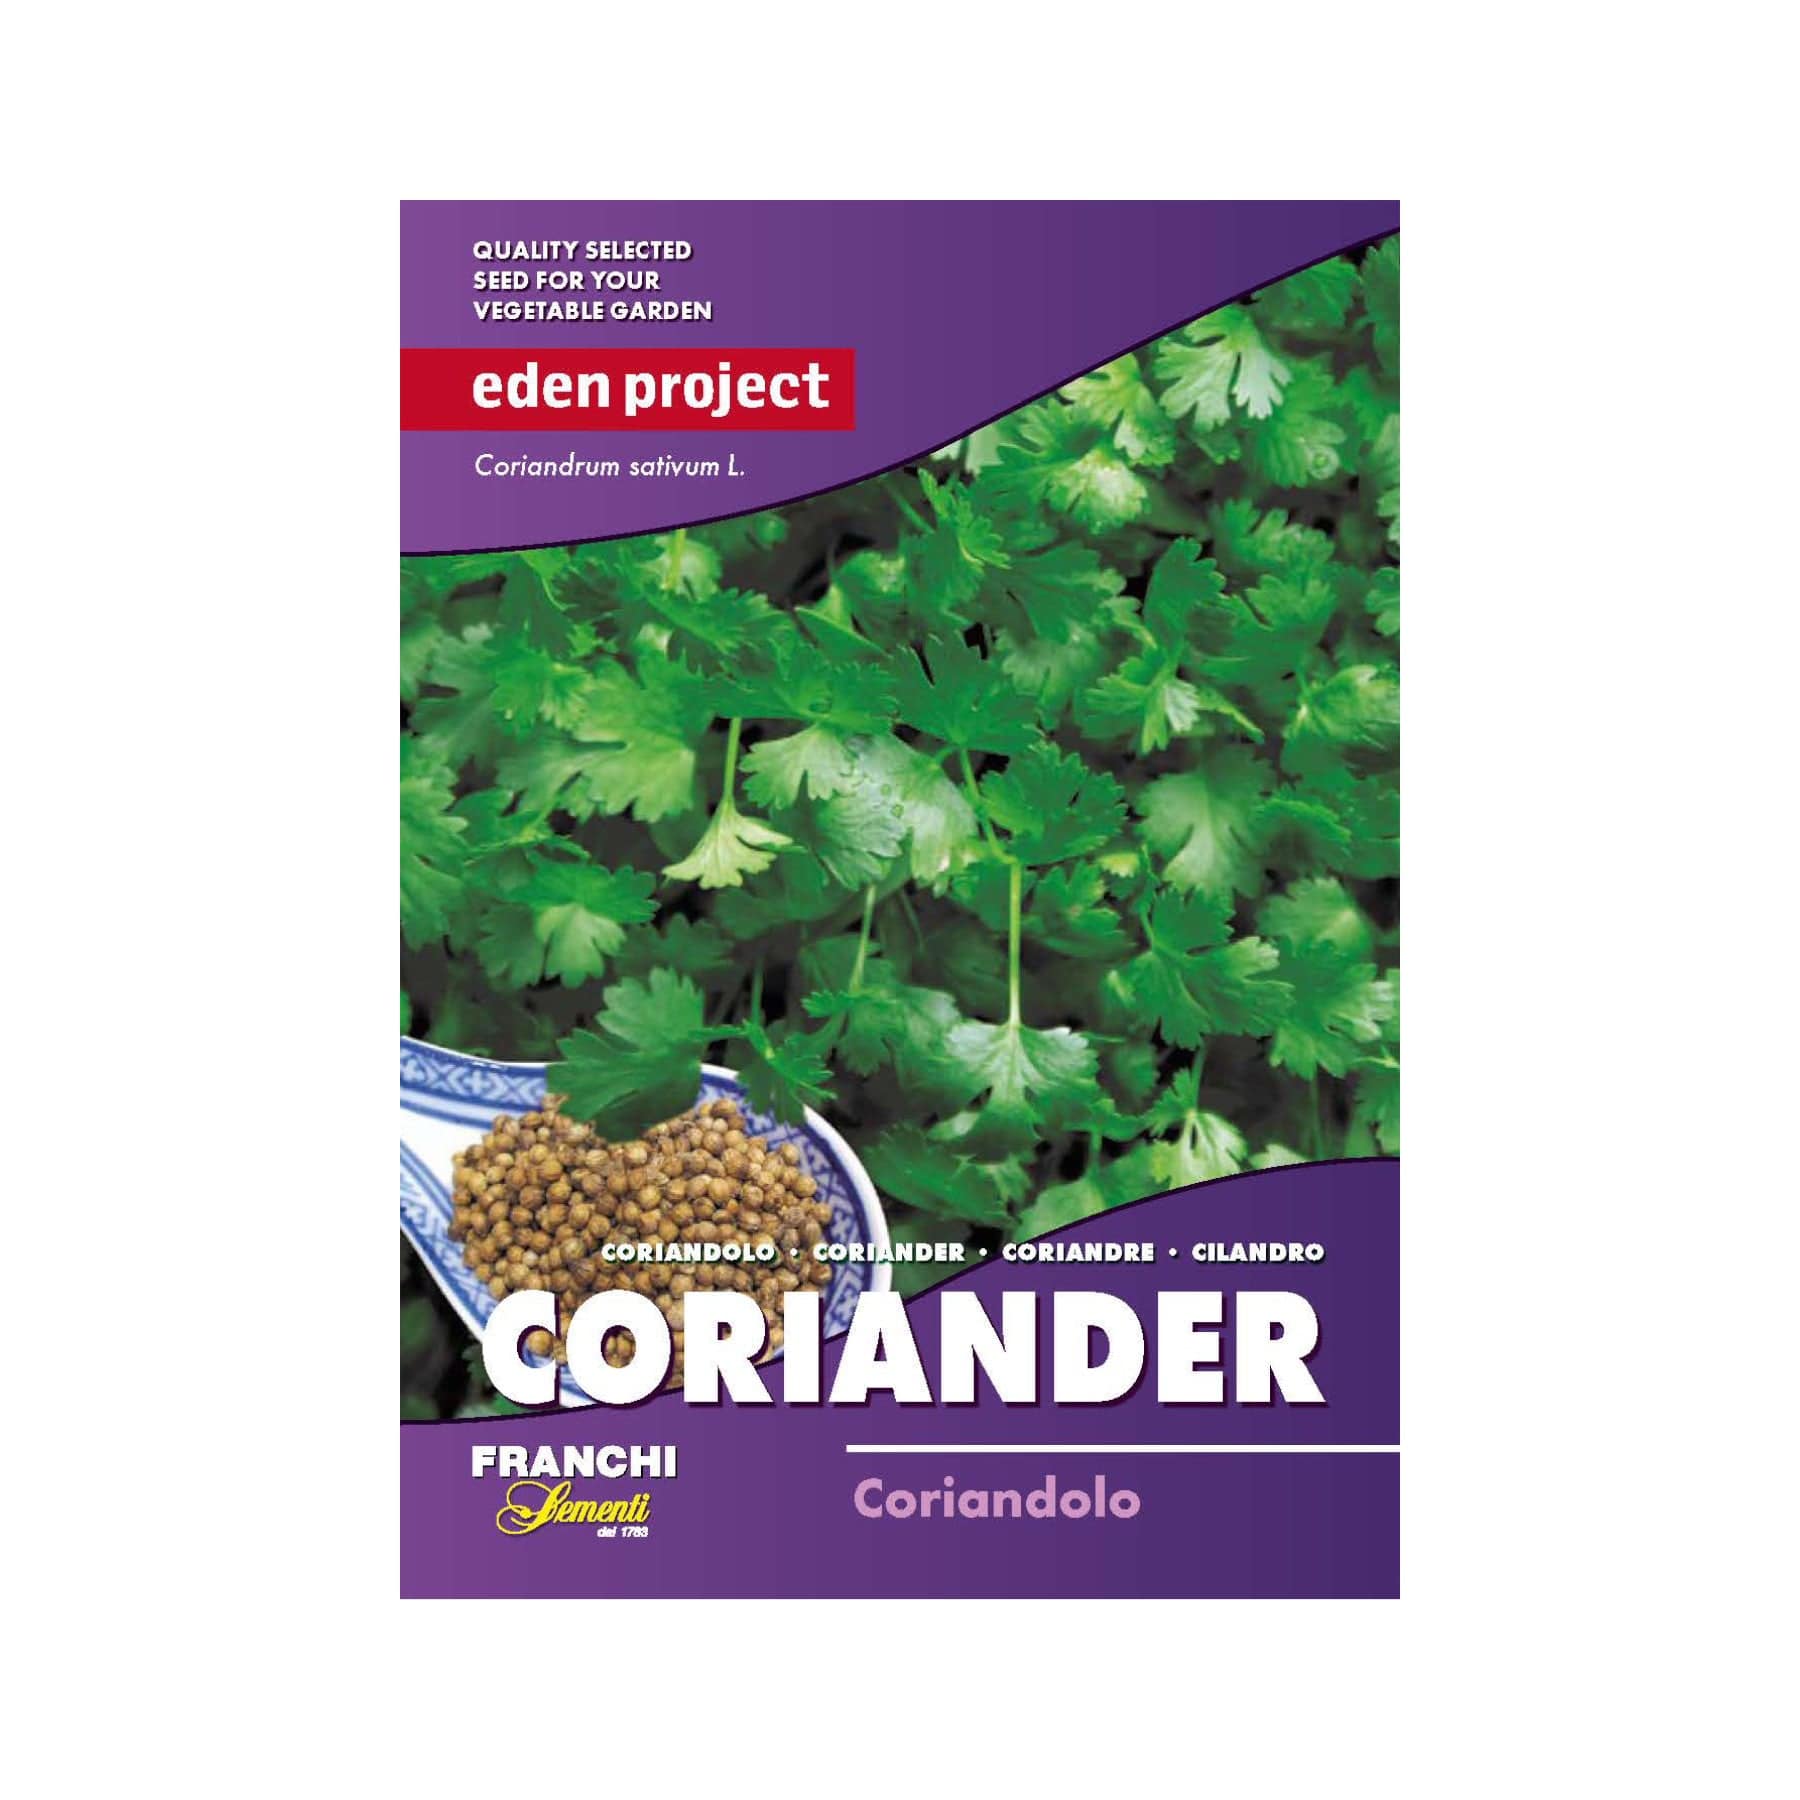 Eden Project seed packet for Coriandrum sativum, commonly known as coriander, cilantro or Chinese parsley, showing fresh green leaves and dried spherical seeds.